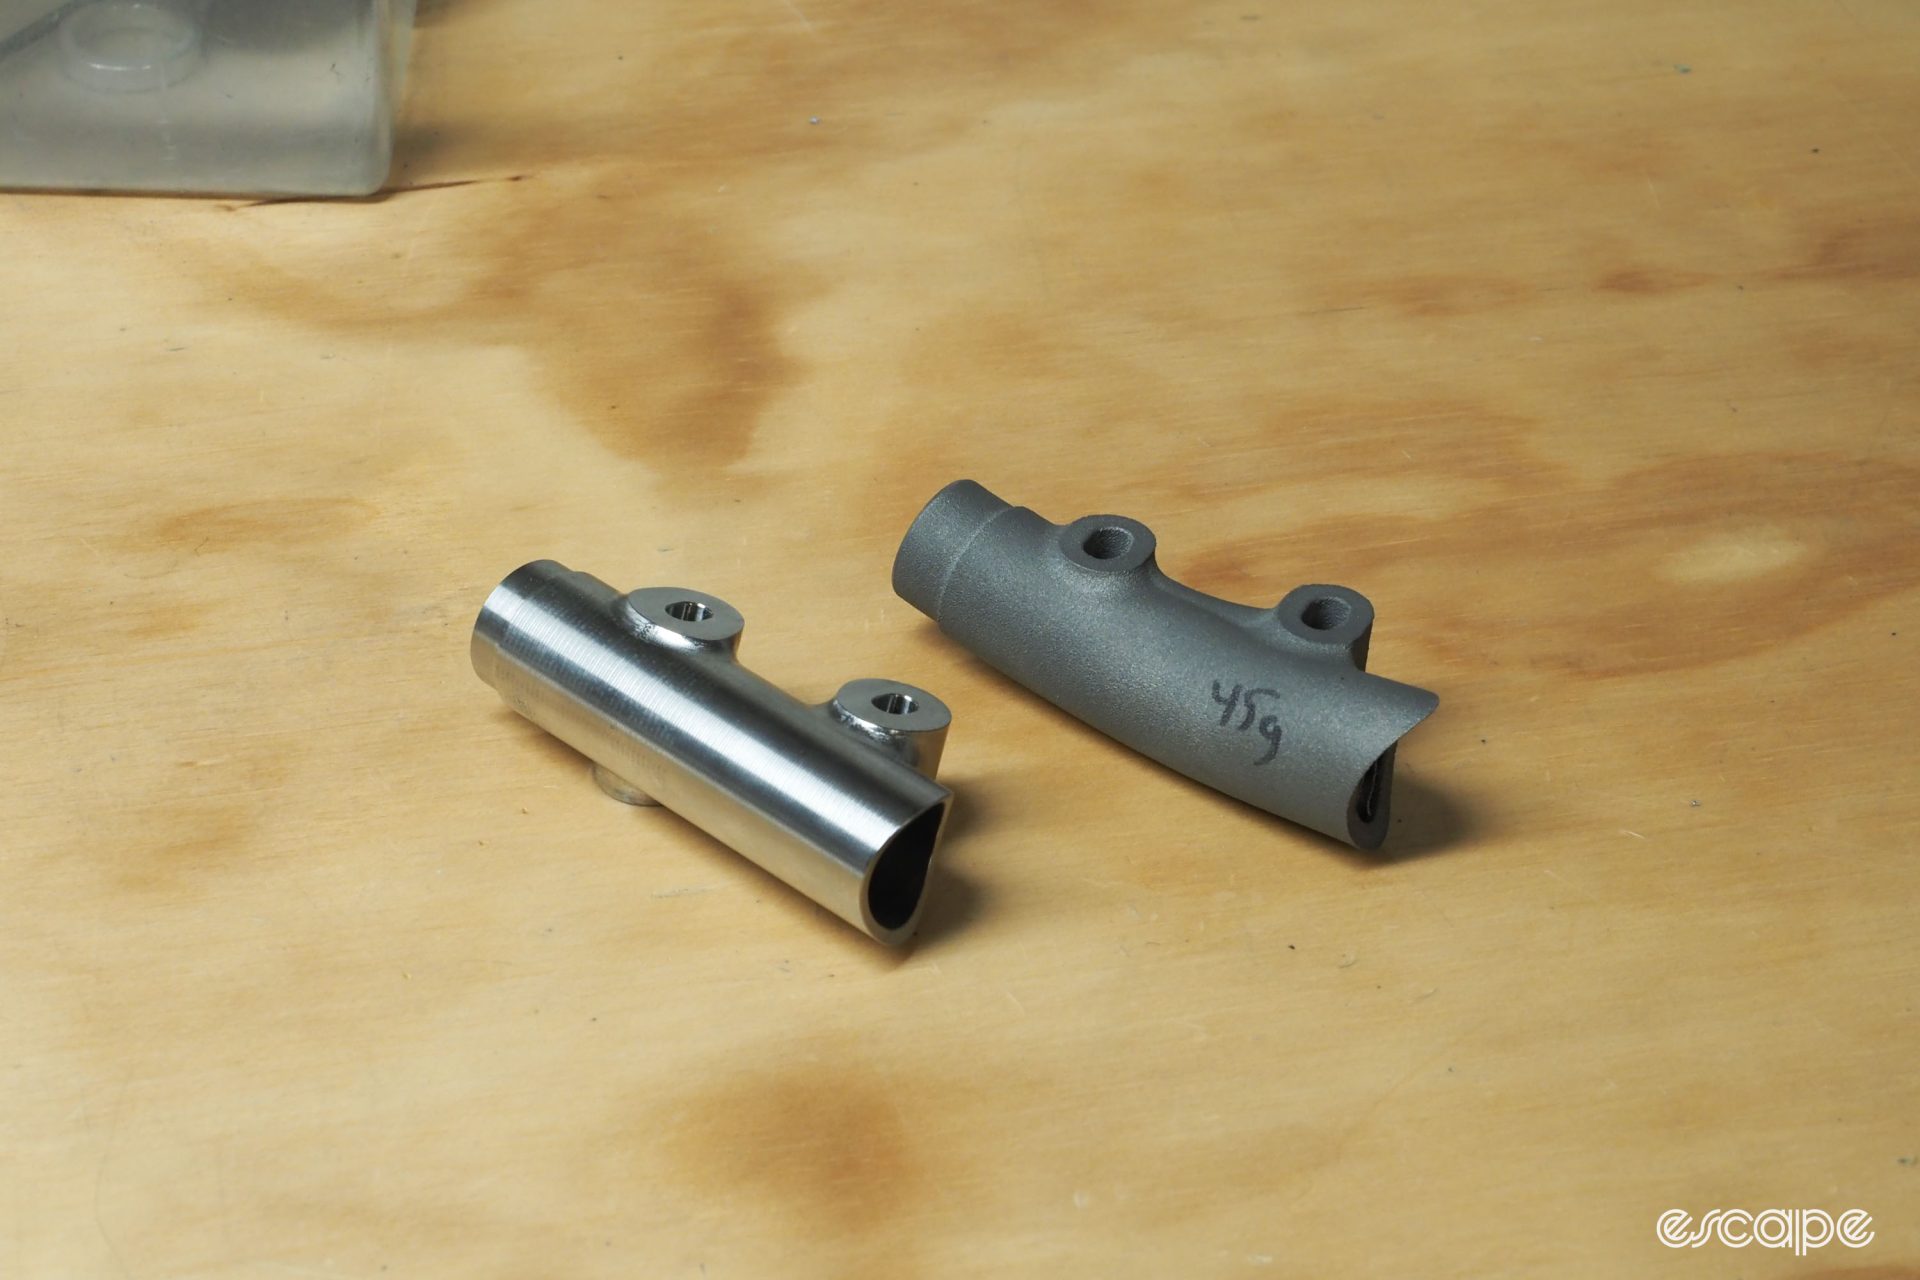 A conventionally made rear disc brake mount shown next to a 3D printed model. Both are titanium, but the conventional one has a distinctive satin finish while the 3D one is a rough, grey matte.